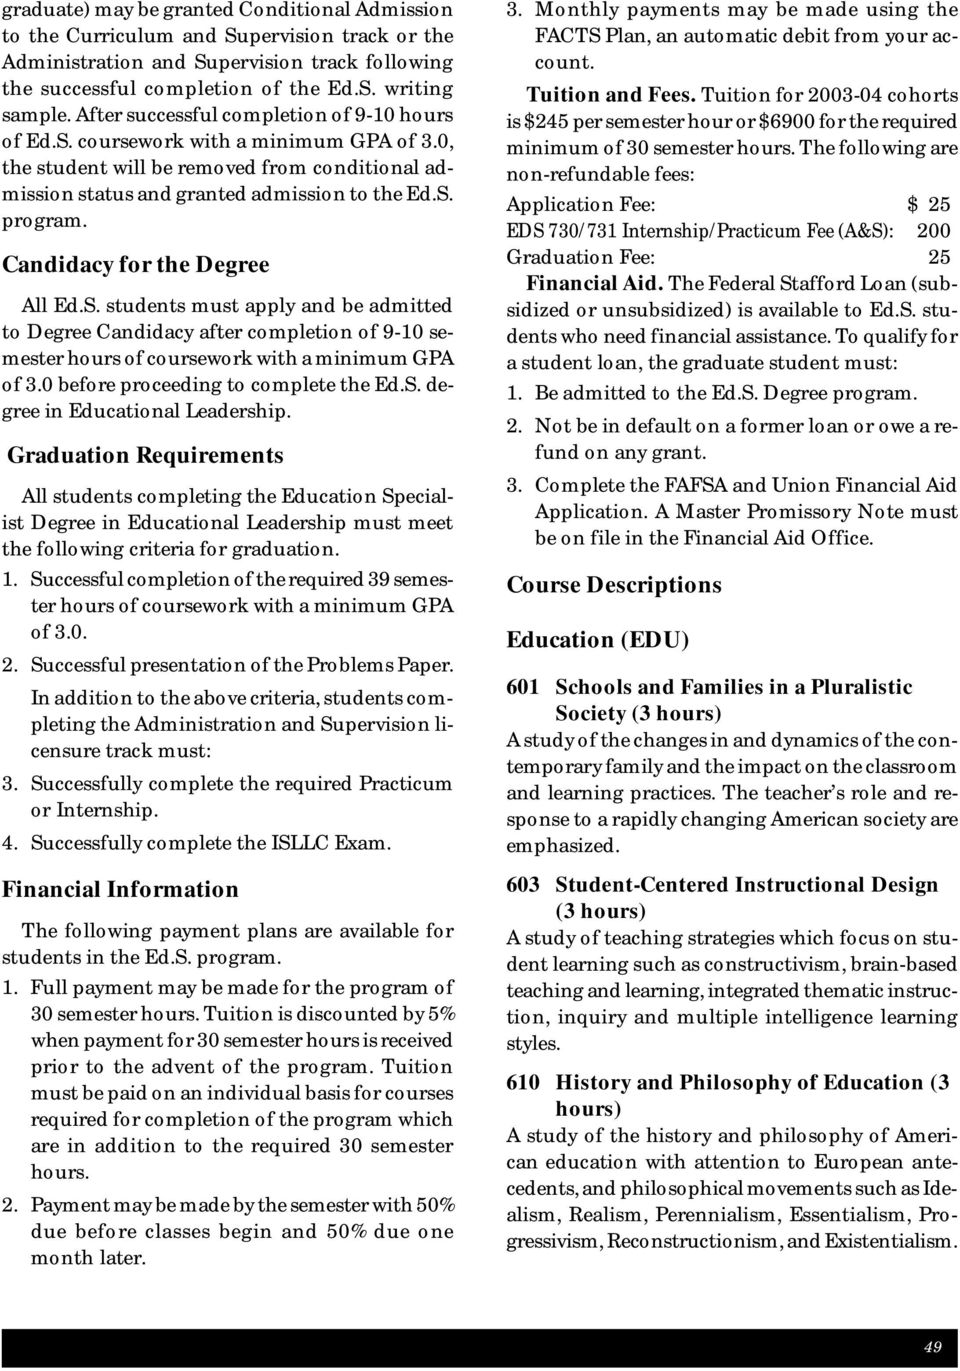 Candidacy for the Degree All Ed.S. students must apply and be admitted to Degree Candidacy after completion of 9-10 semester hours of coursework with a minimum GPA of 3.